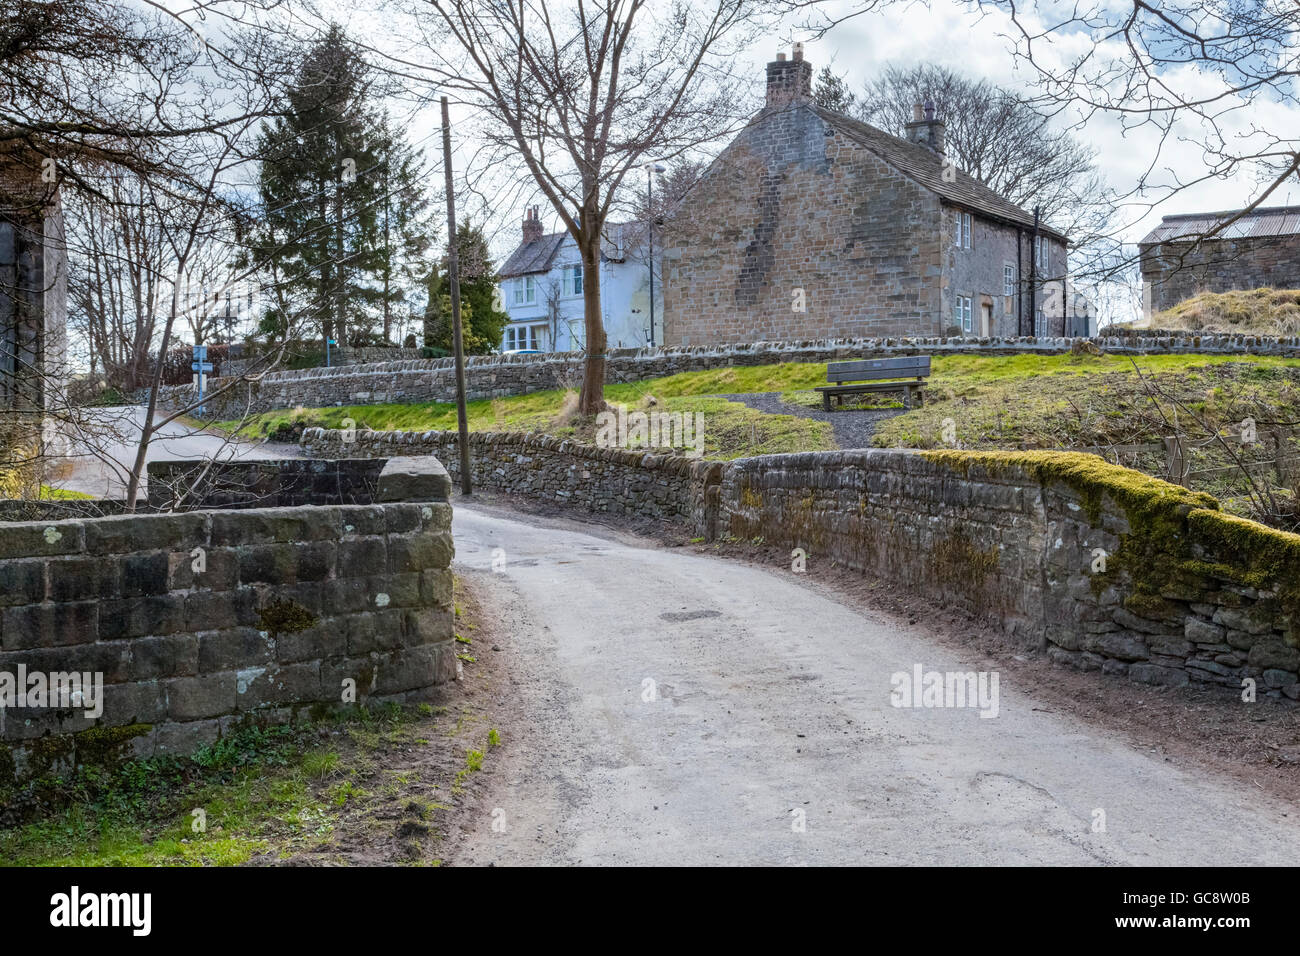 Narrow country road approaching the village of Hope, Derbyshire, Peak District, England, UK Stock Photo